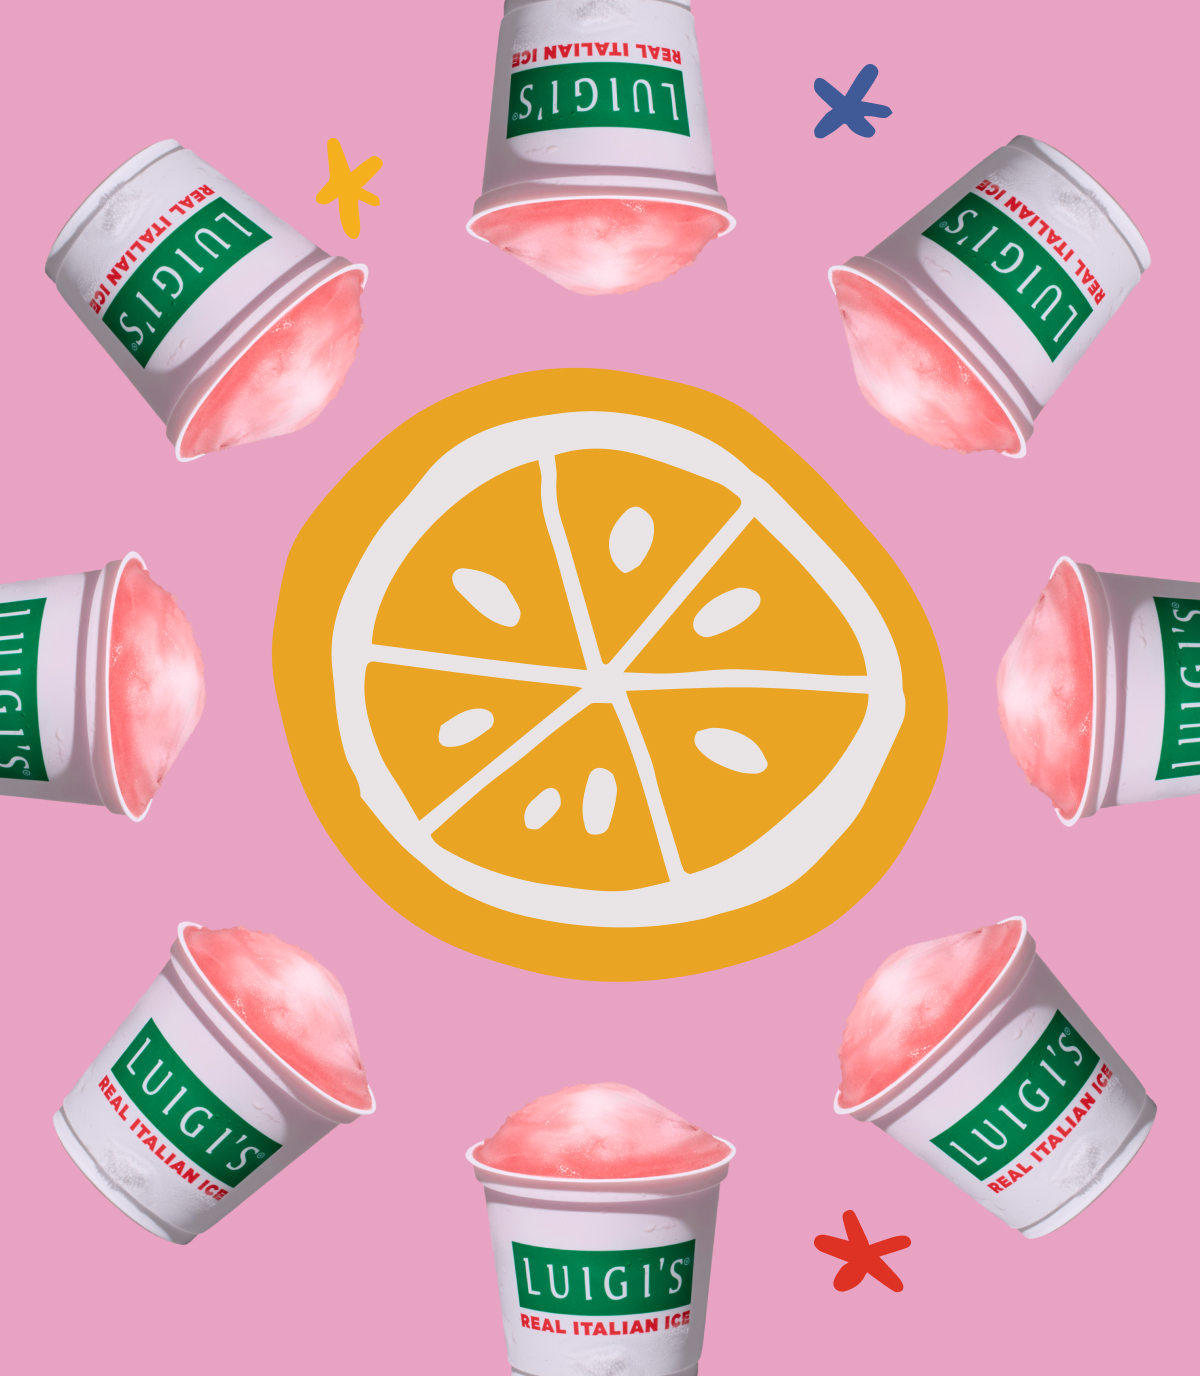 Lemon slice graphic in center surrounded by eight cups of cherry lemon swirl LUIGI'S Real Italian Ice. Background is pink with colorful stars.